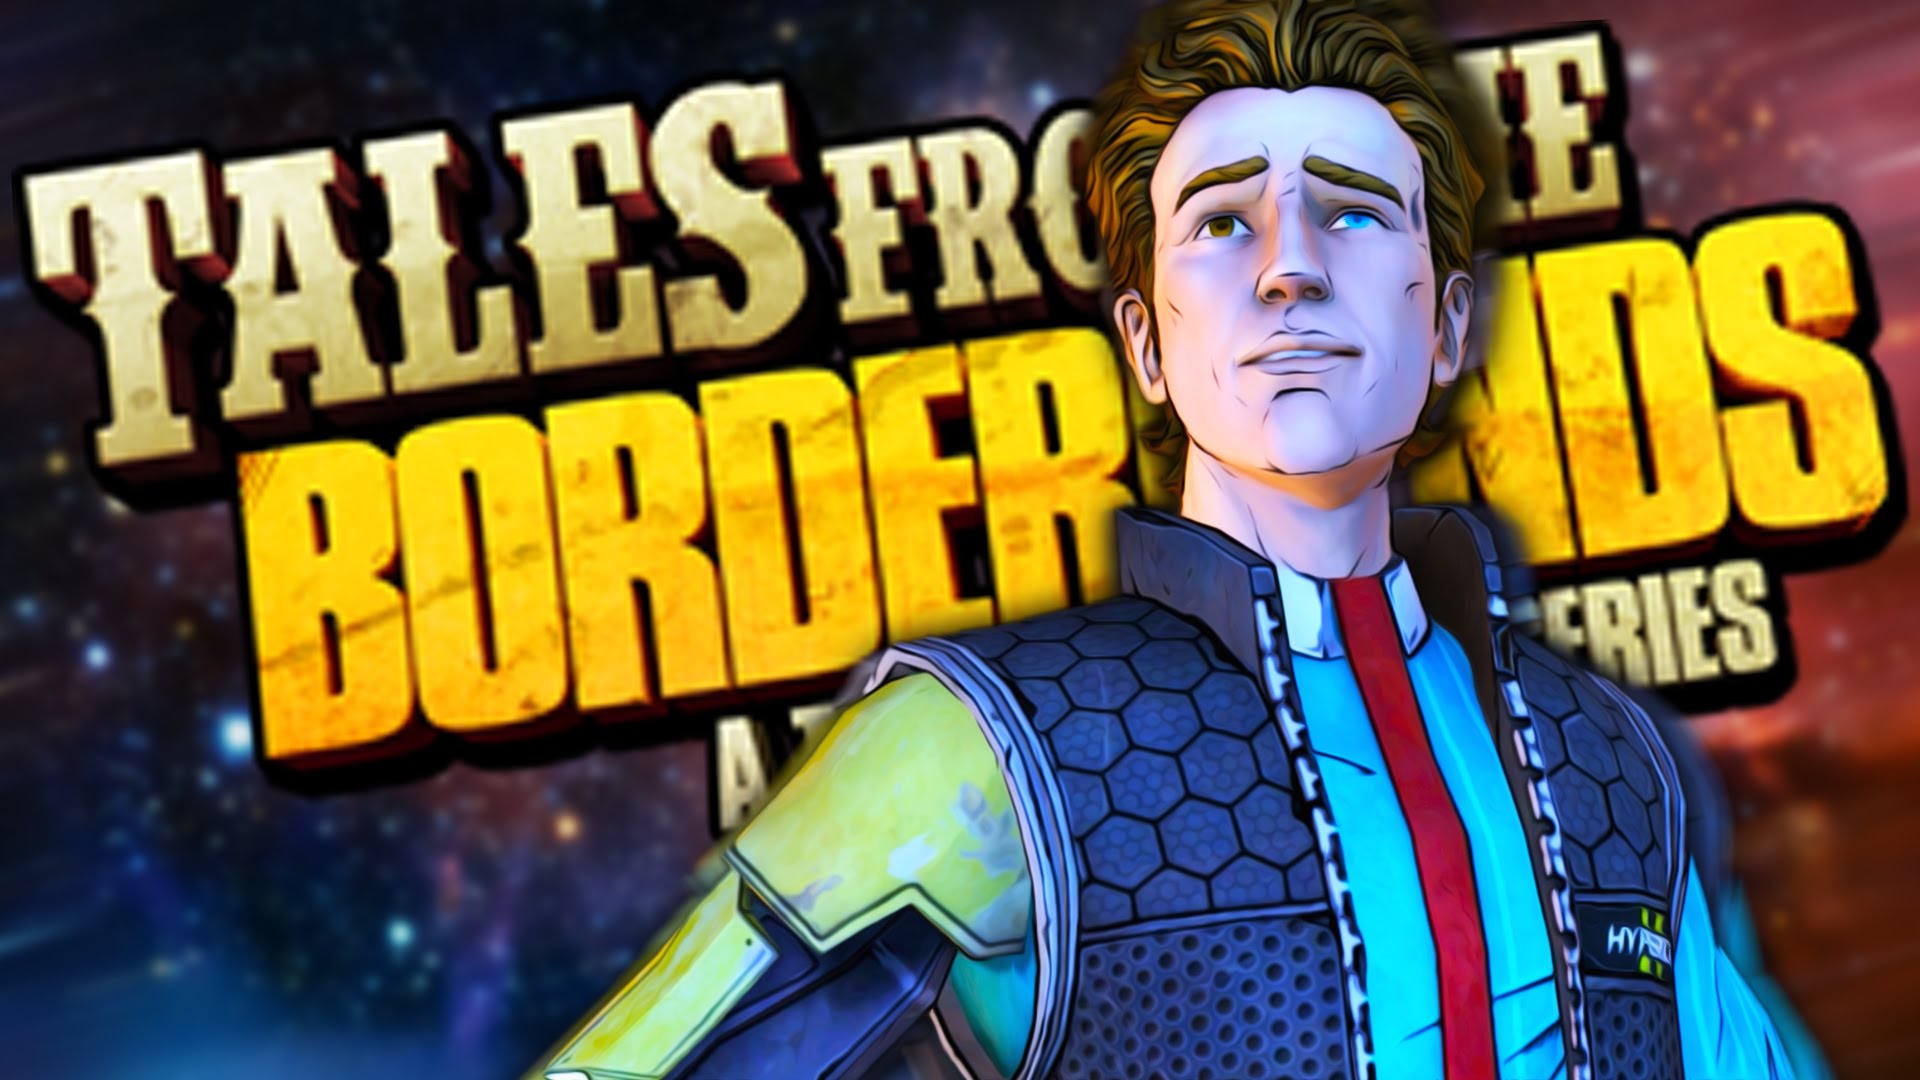 Tales From The Borderlands Backgrounds, Compatible - PC, Mobile, Gadgets| 1920x1080 px